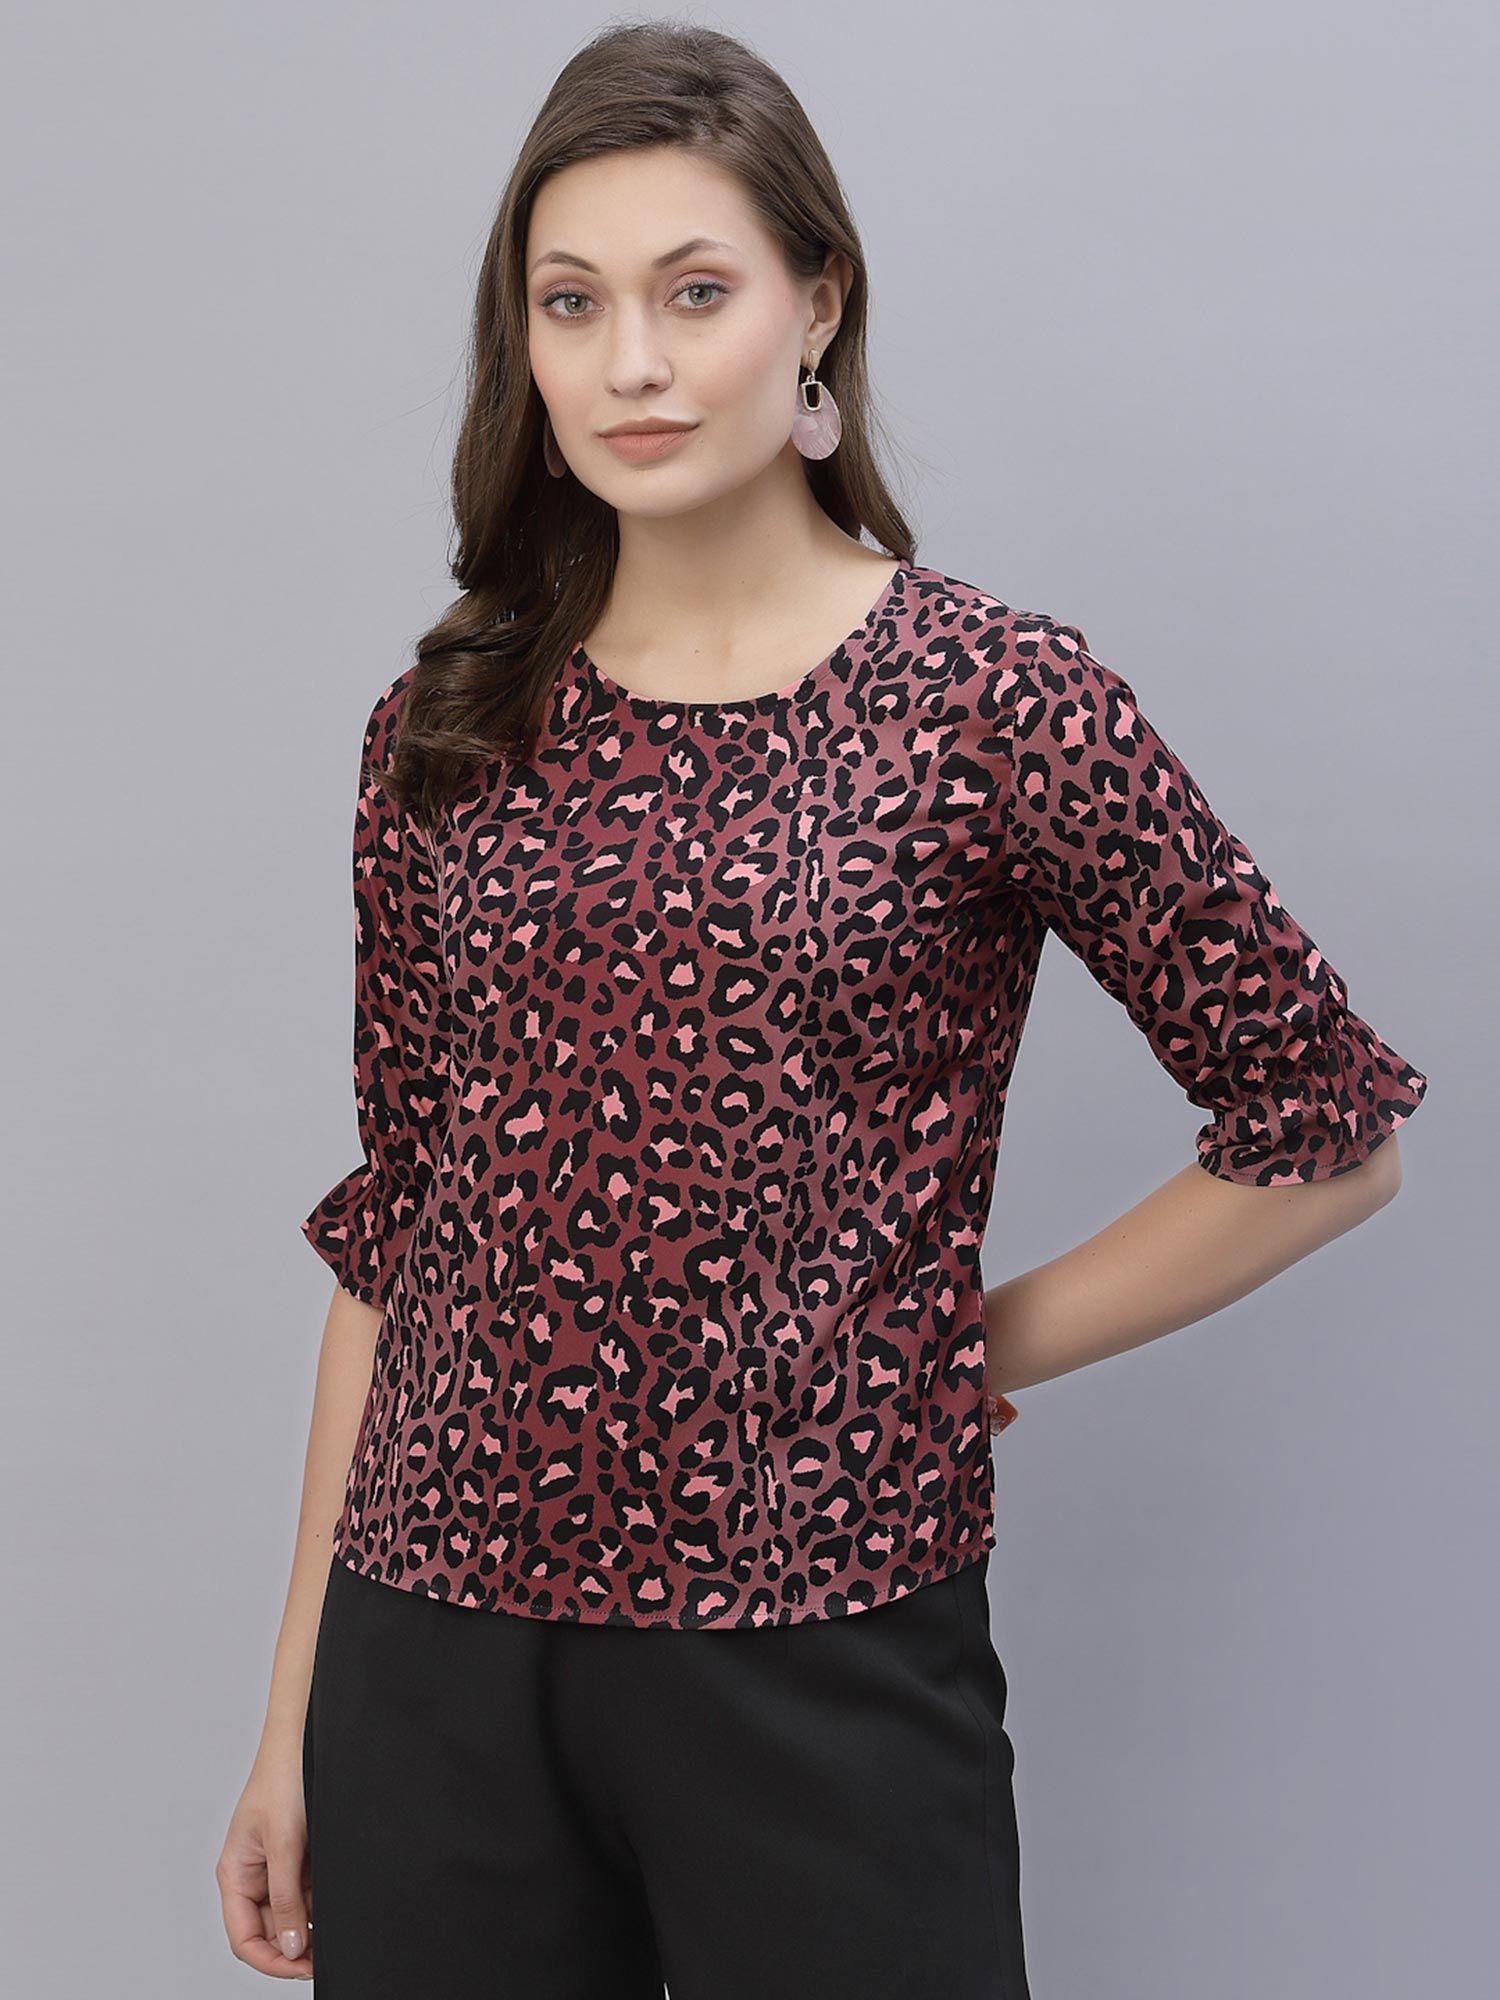 women brown and black animal printed polyester smart casual top